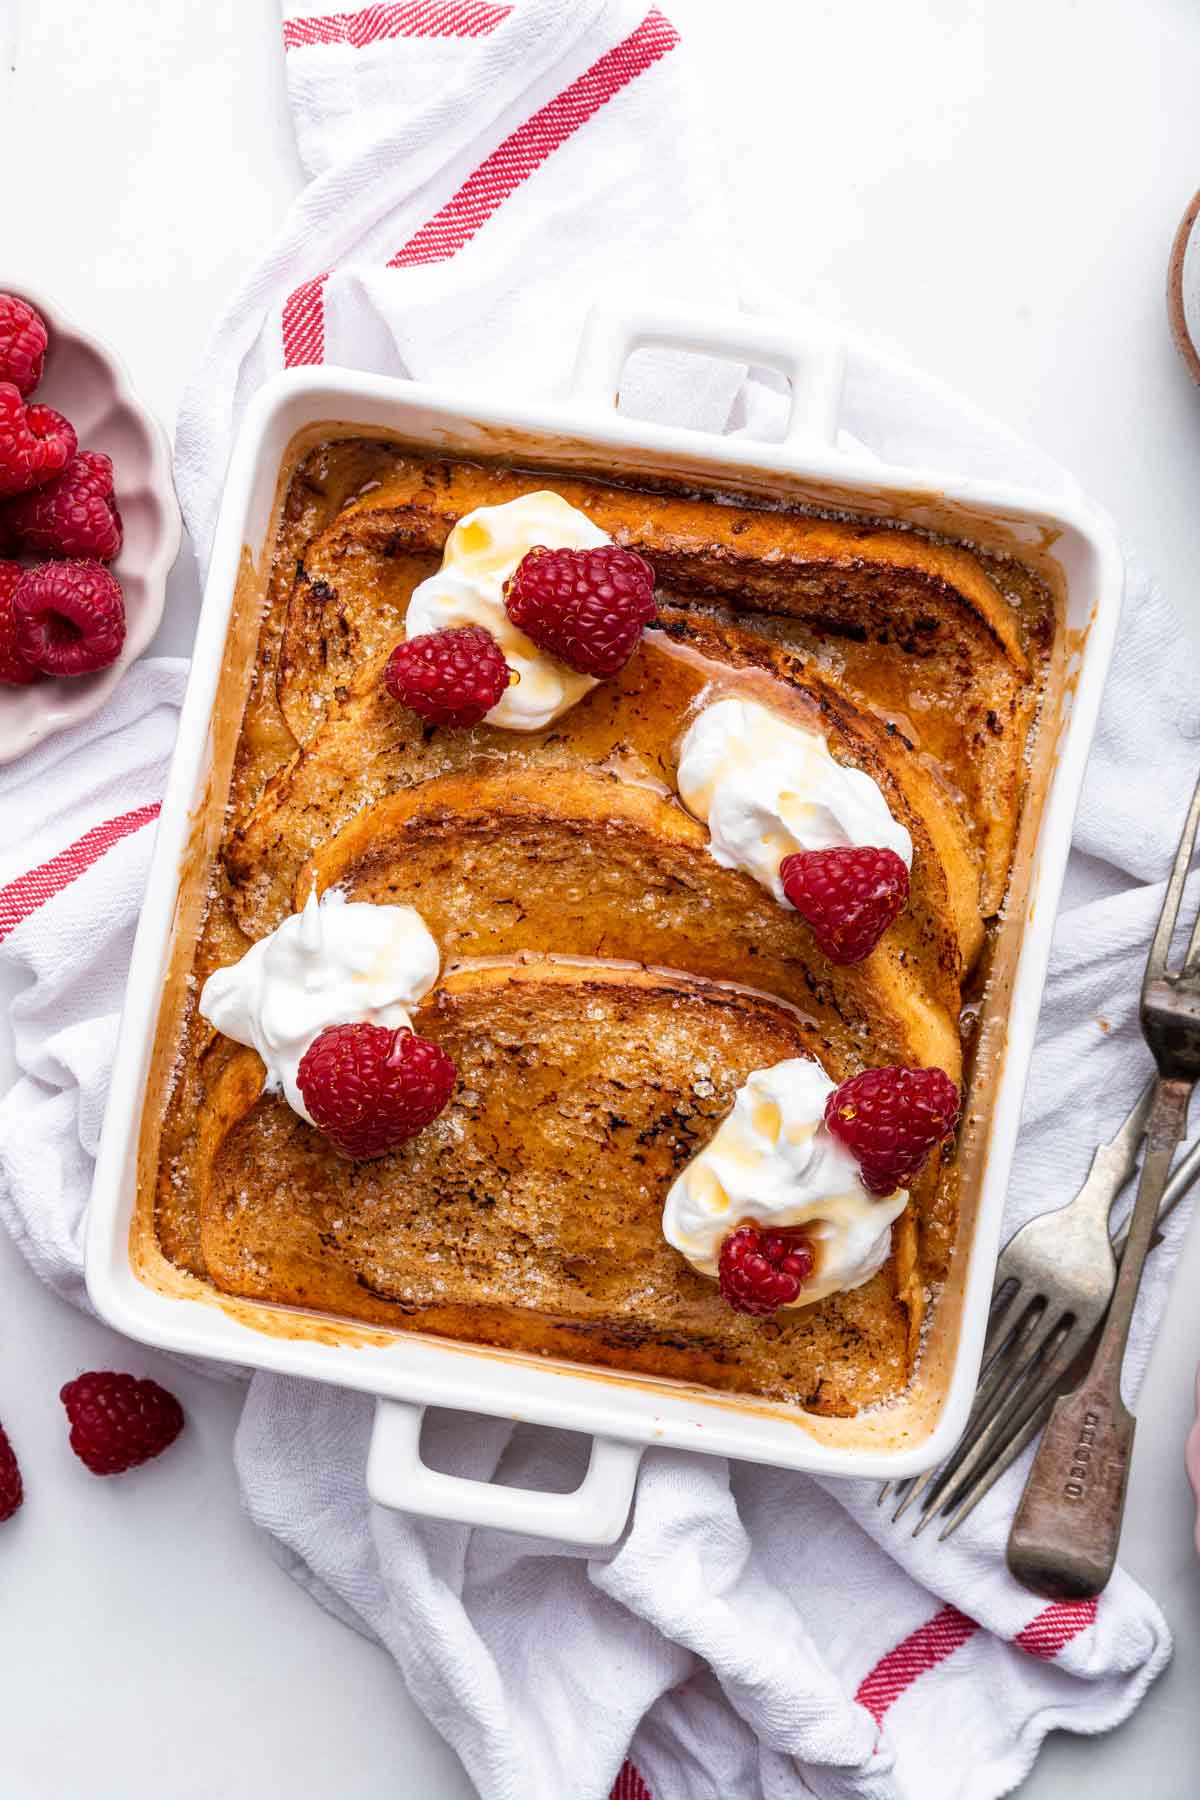 Vertical image of creme brulee French toast garnished with raspberries and whipped cream.